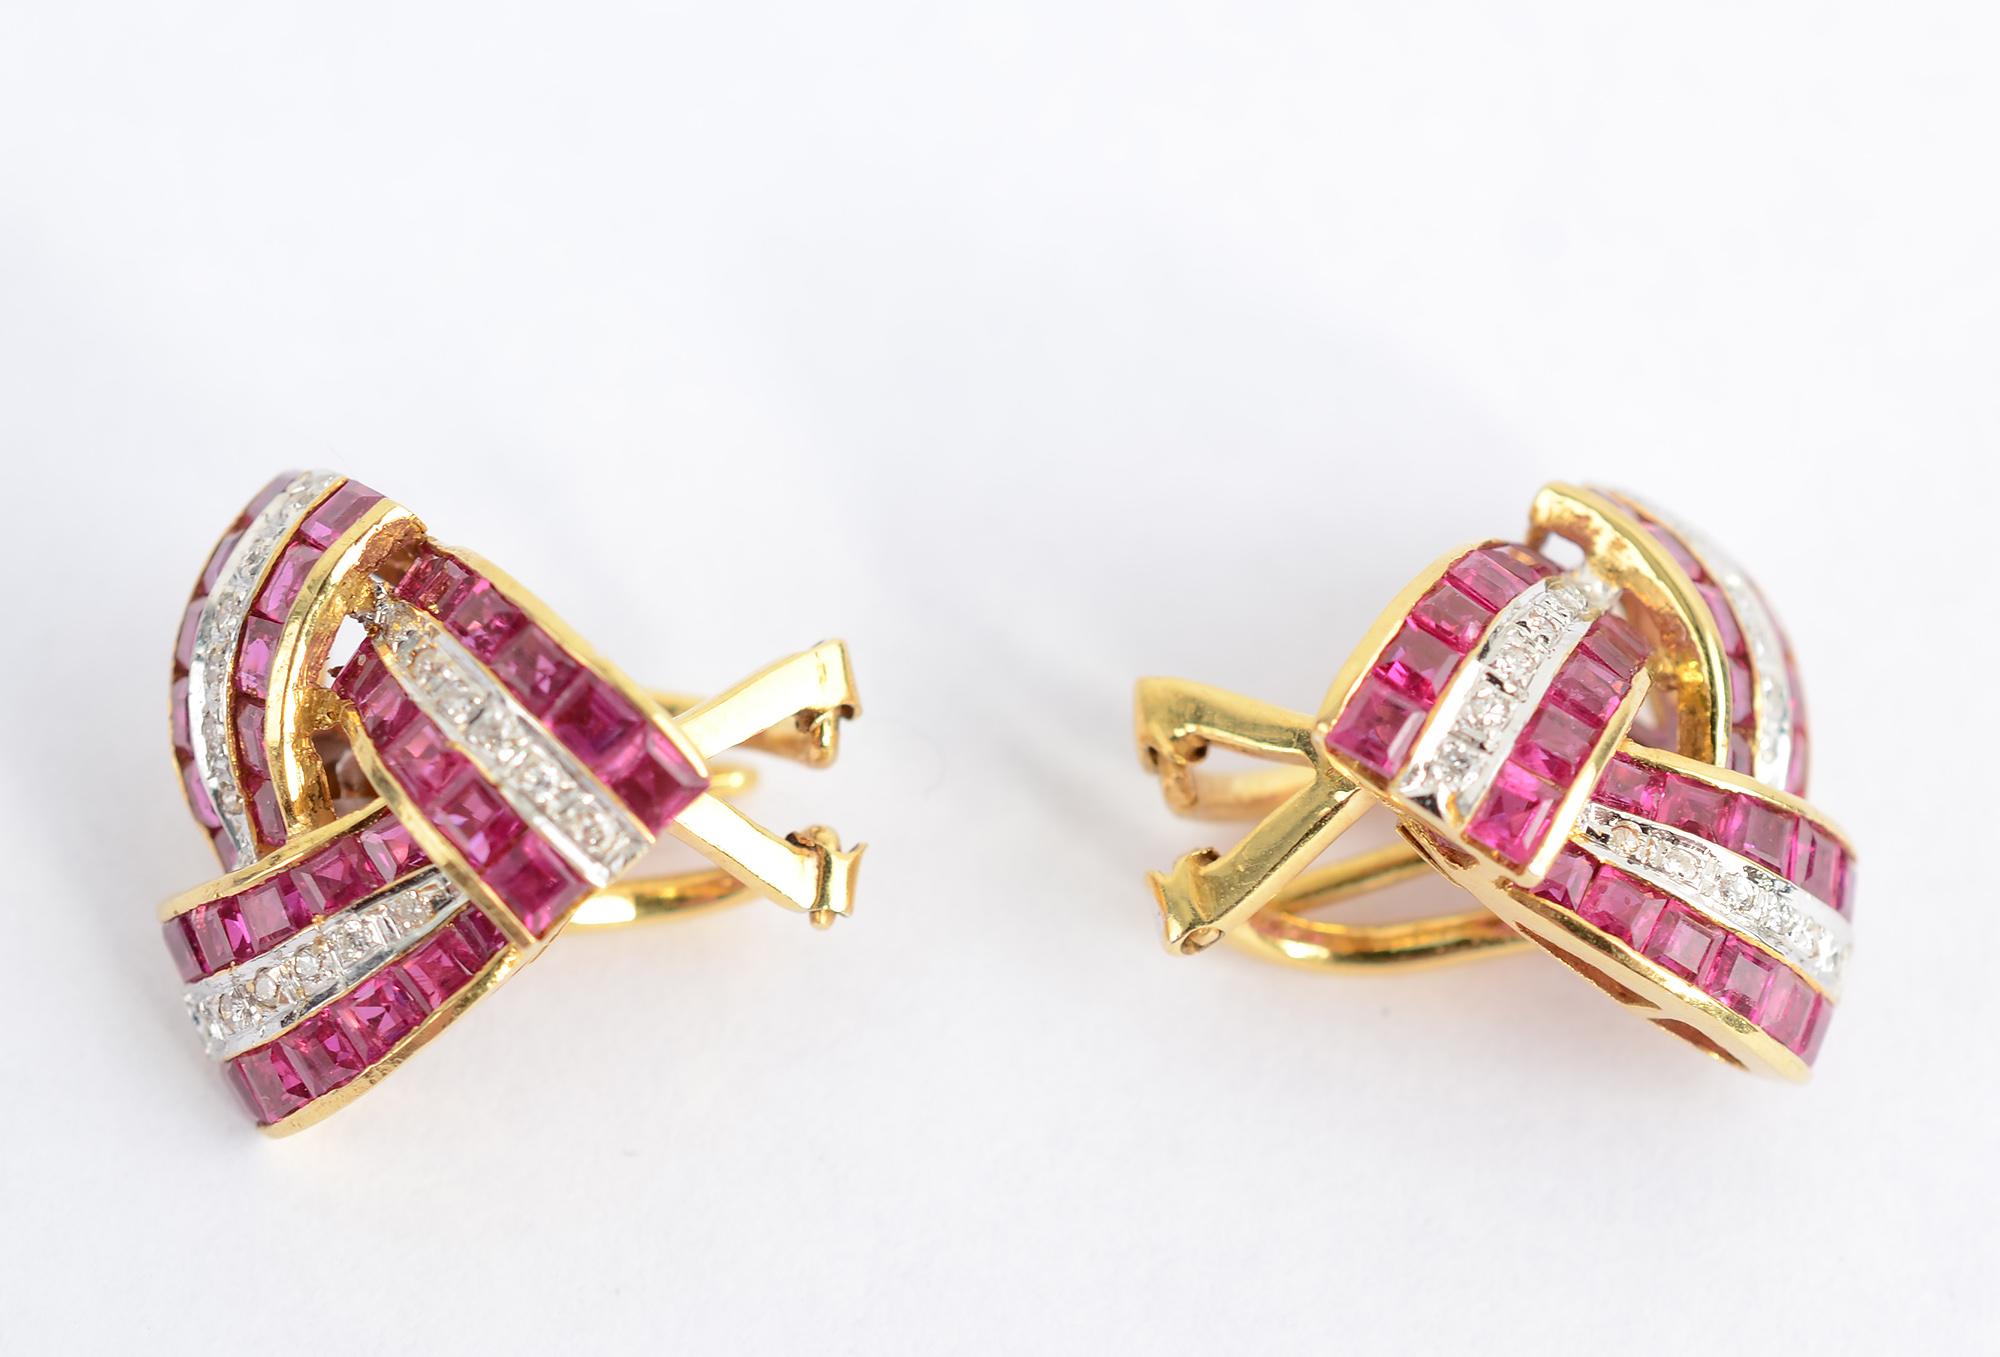 Lovely diamond and ruby triangular shpaed earrings set in 14 karat gold. The three sides of the triangle are interlaced giving nice dimensionality. The earrings have collapsible post and clip backs. They measure 3/4